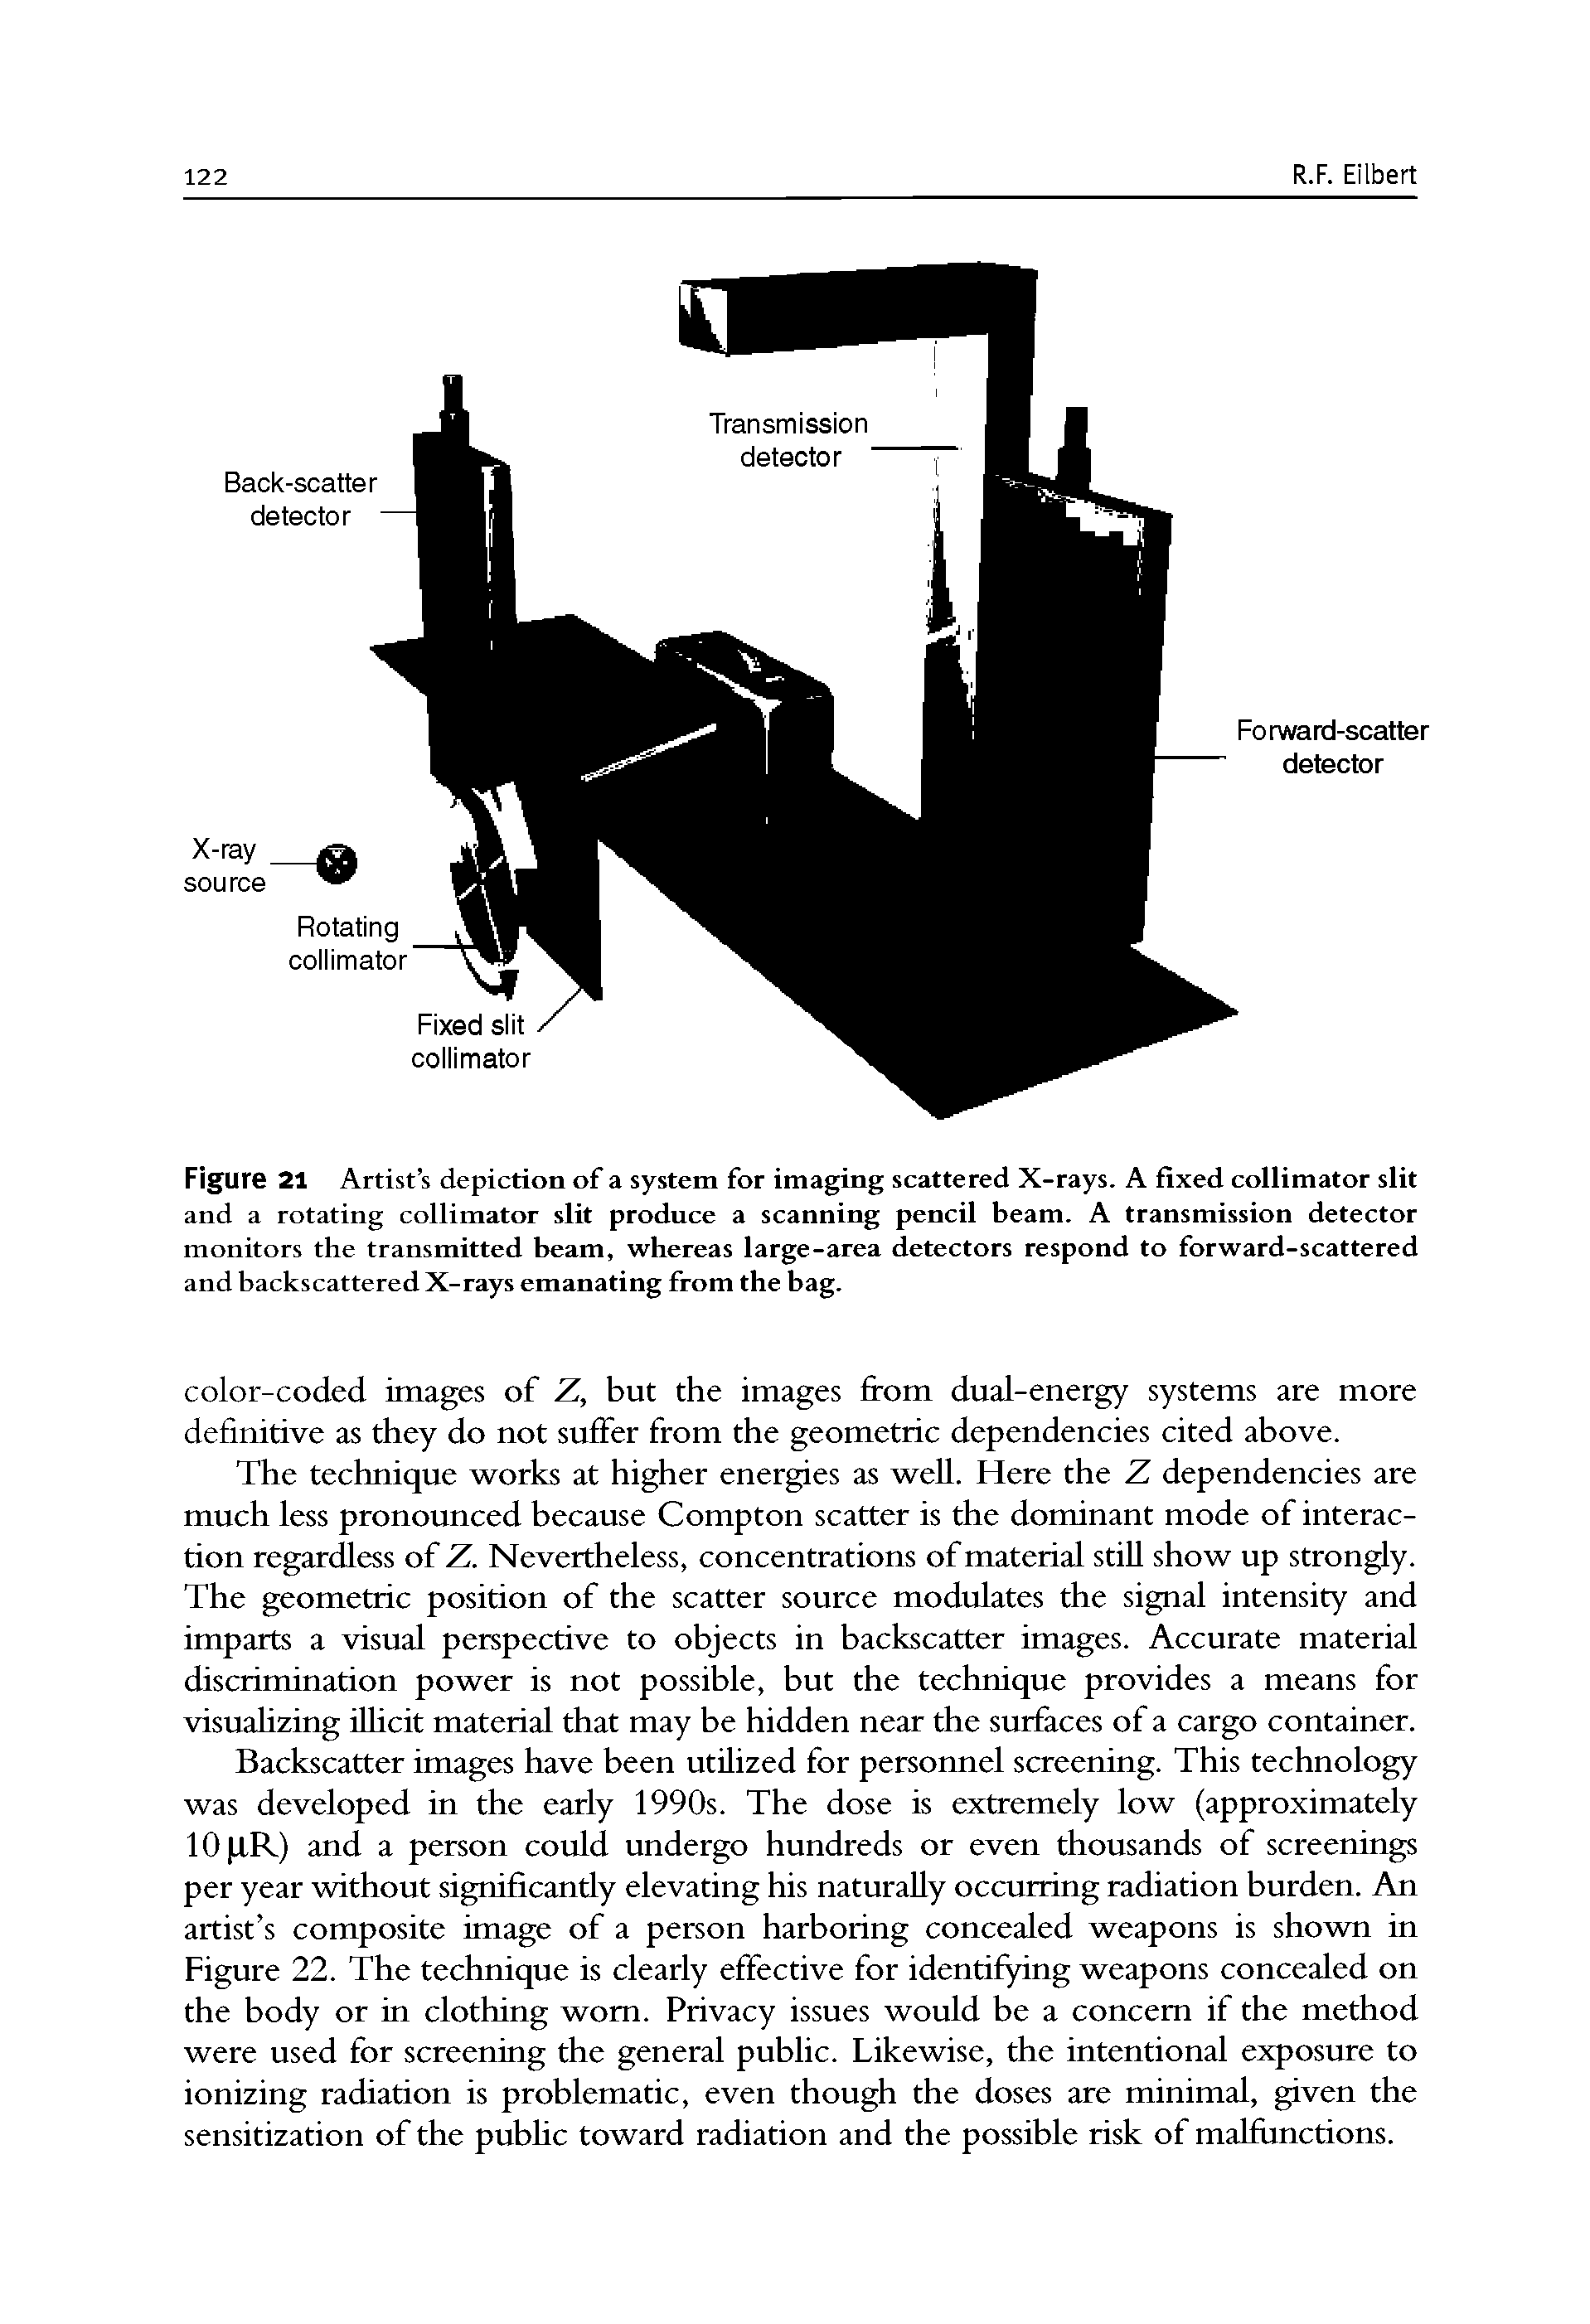 Figure 21 Artist s depiction of a system for imaging scattered X-rays. A fixed collimator slit and a rotating collimator slit produce a scanning pencil beam. A transmission detector monitors the transmitted beam, whereas large-area detectors respond to forward-scattered and backscattered X-rays emanating from the bag.